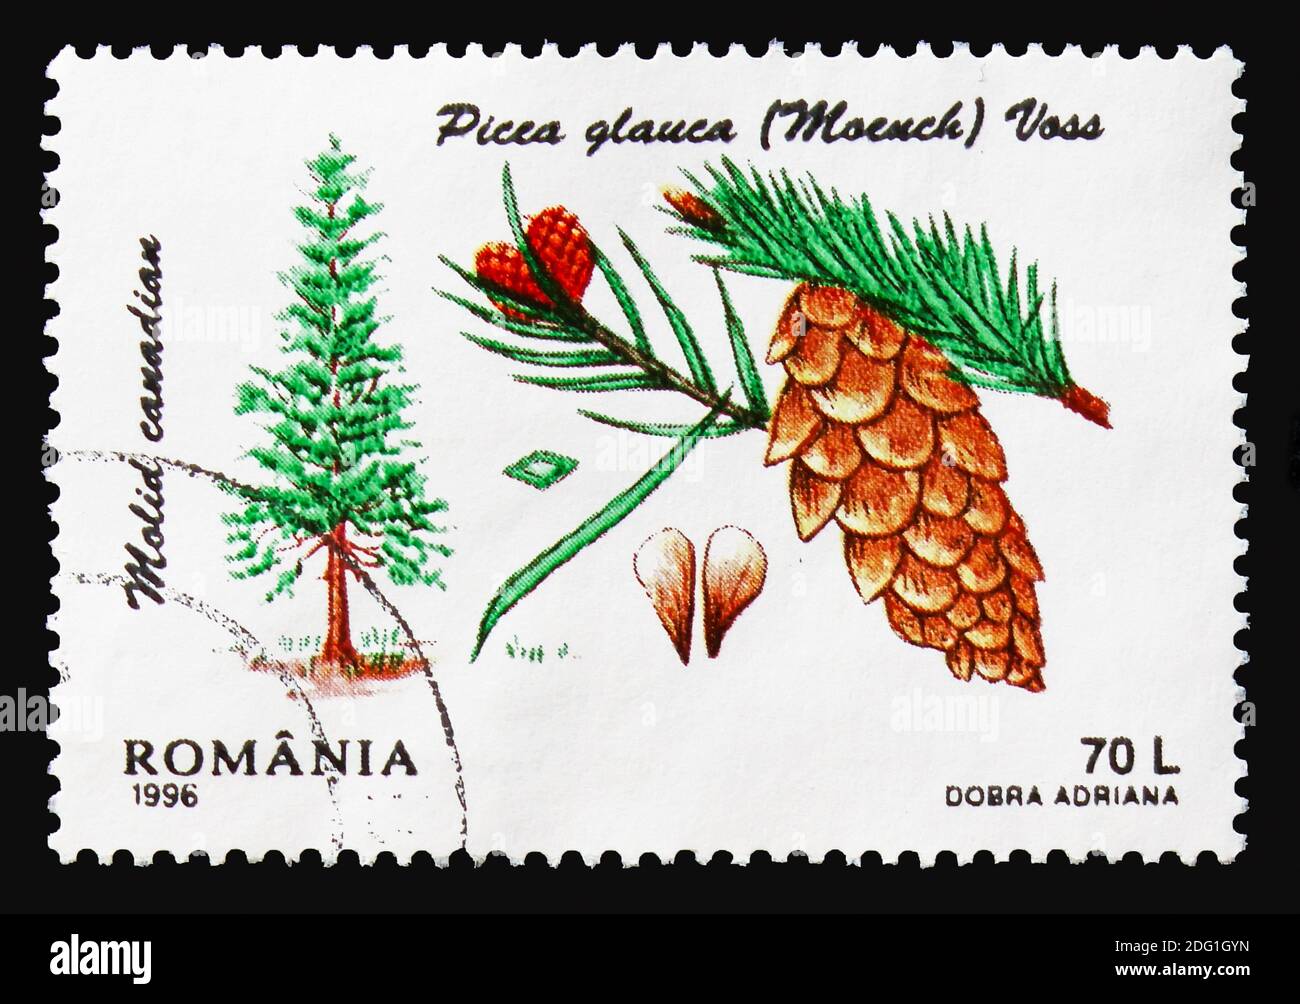 MOSCOW, RUSSIA - AUGUST 18, 2018: A stamp printed in Romania shows White spruce (Picea glauca), Conifers serie, circa 1996 Stock Photo